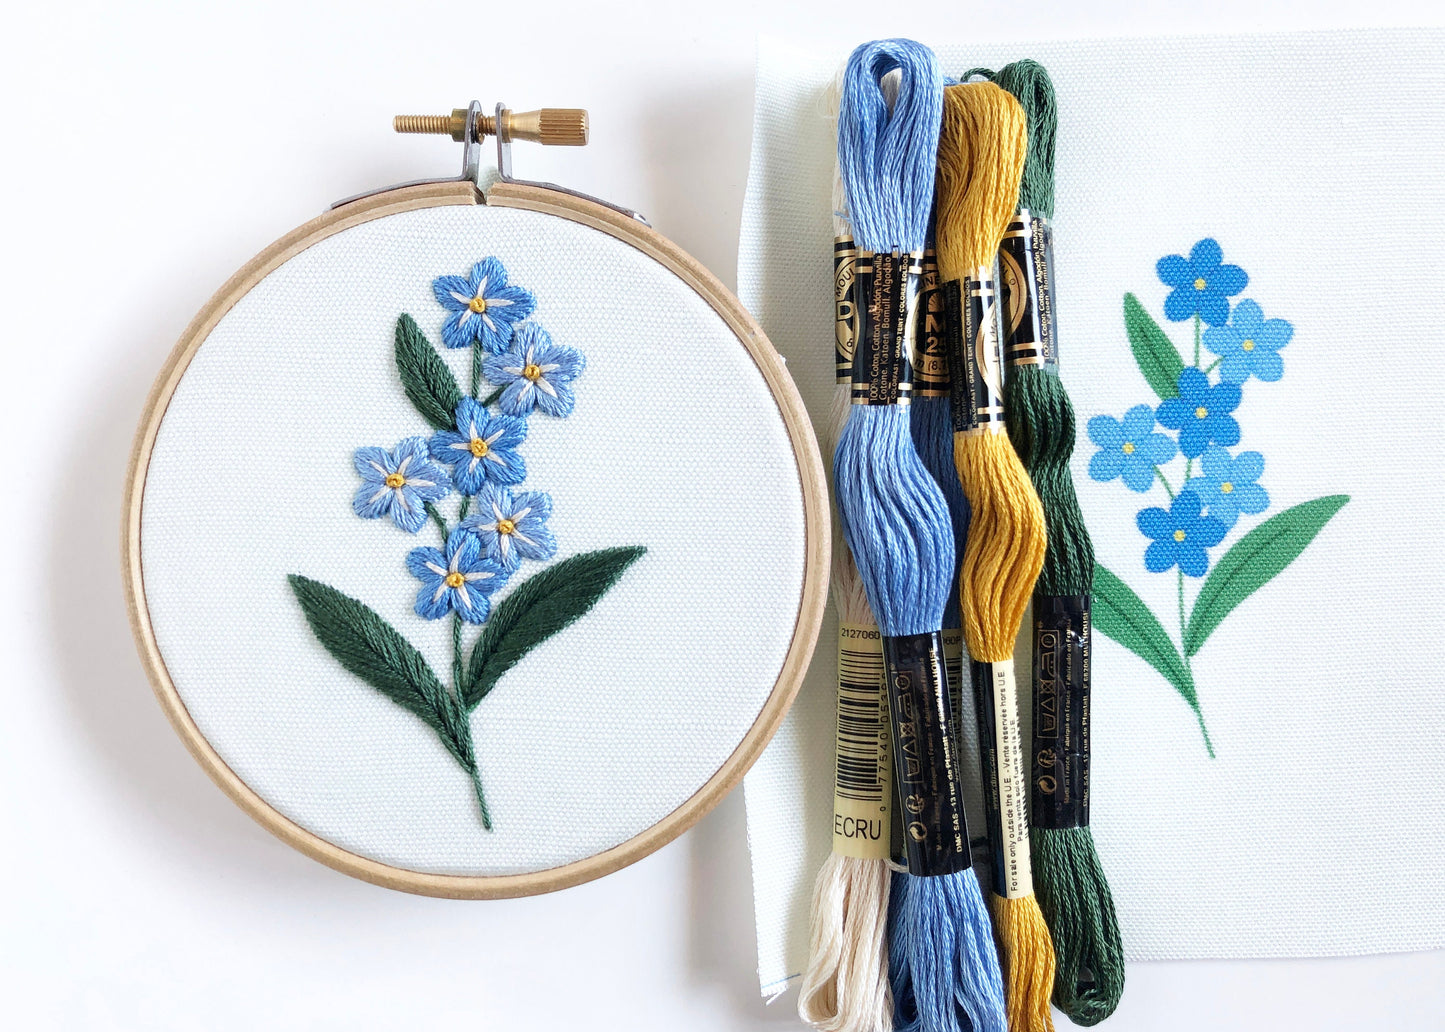 Forget Me Not Embroidery Kit, Botanical Embroidery, Beginner embroidery pattern, Wildflower Embroidery, needlepoint kit, printed pattern